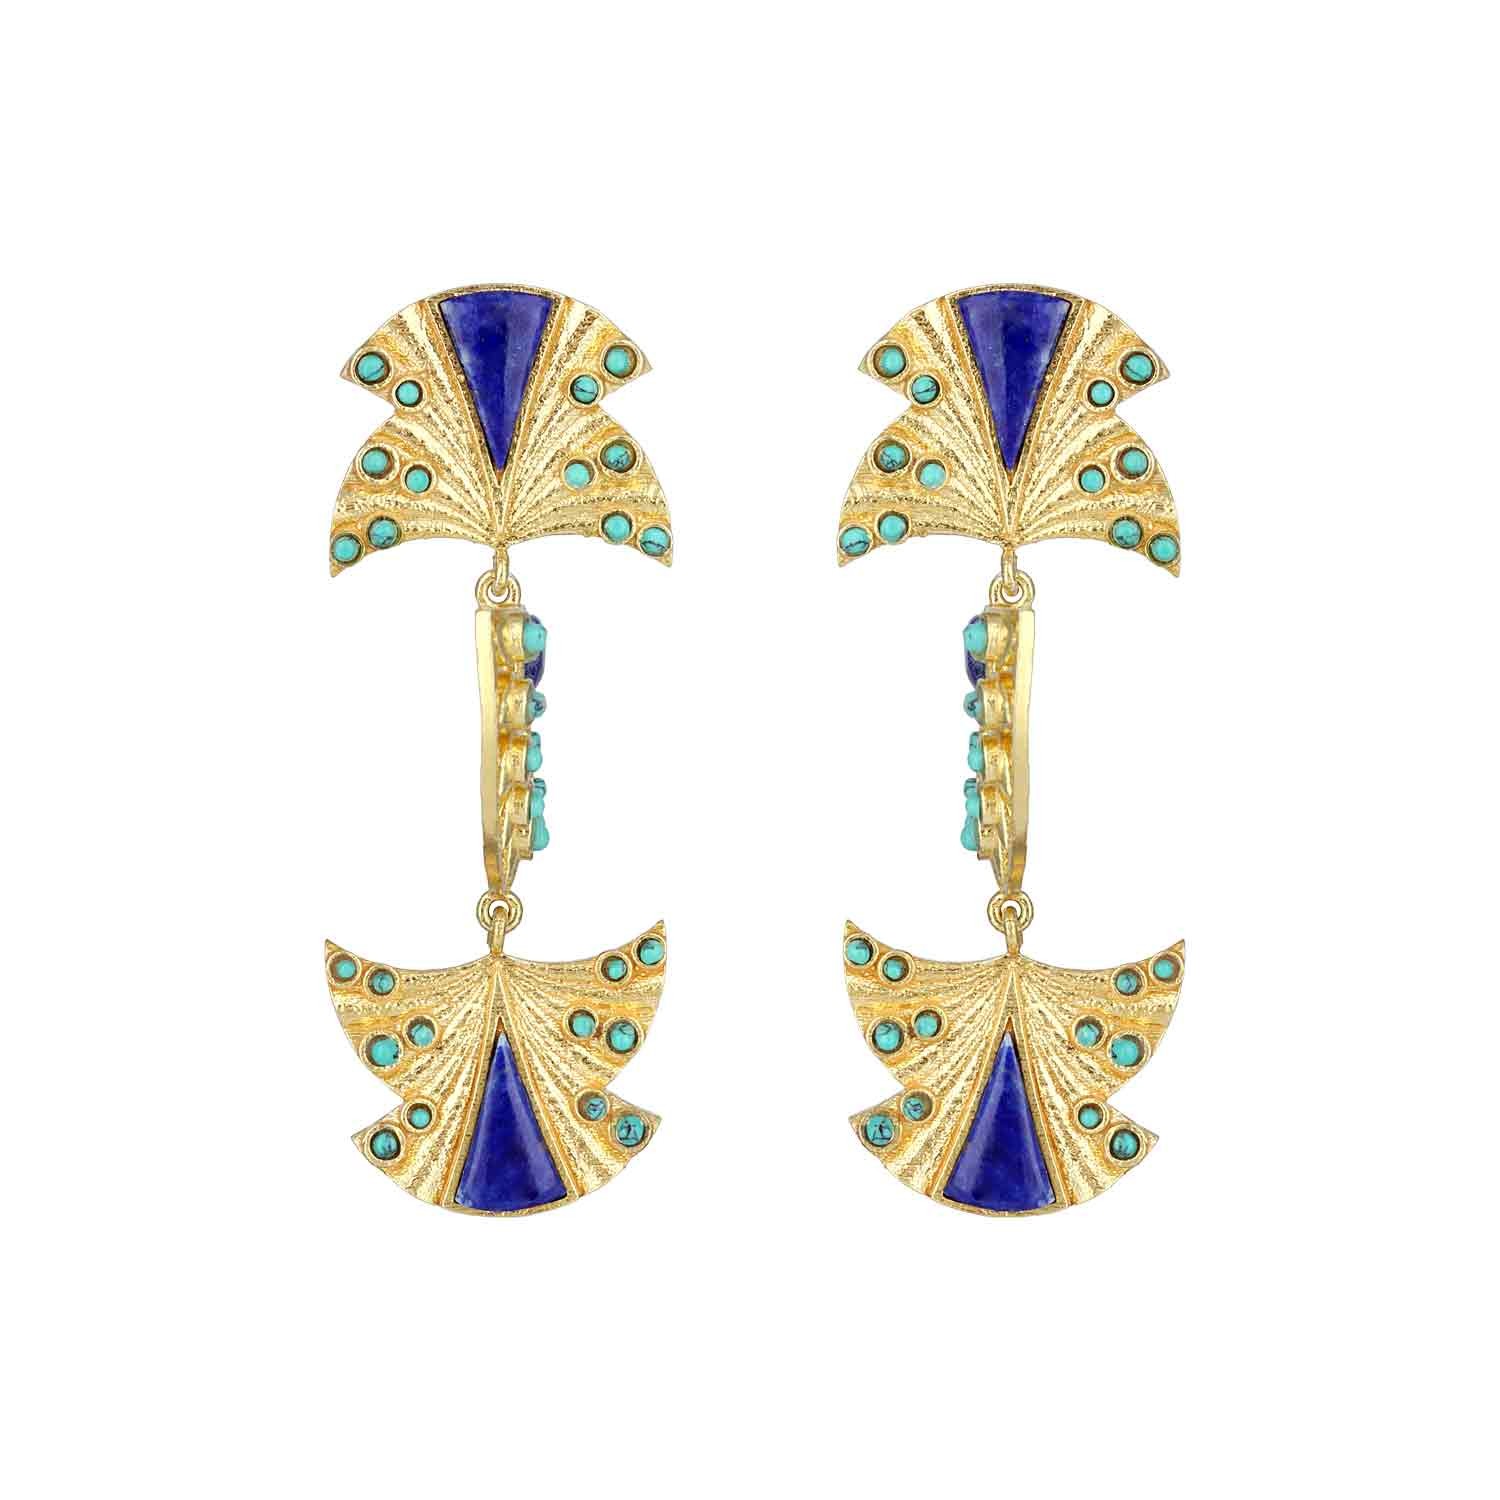 Half and Half Egyptian Statement Earrings